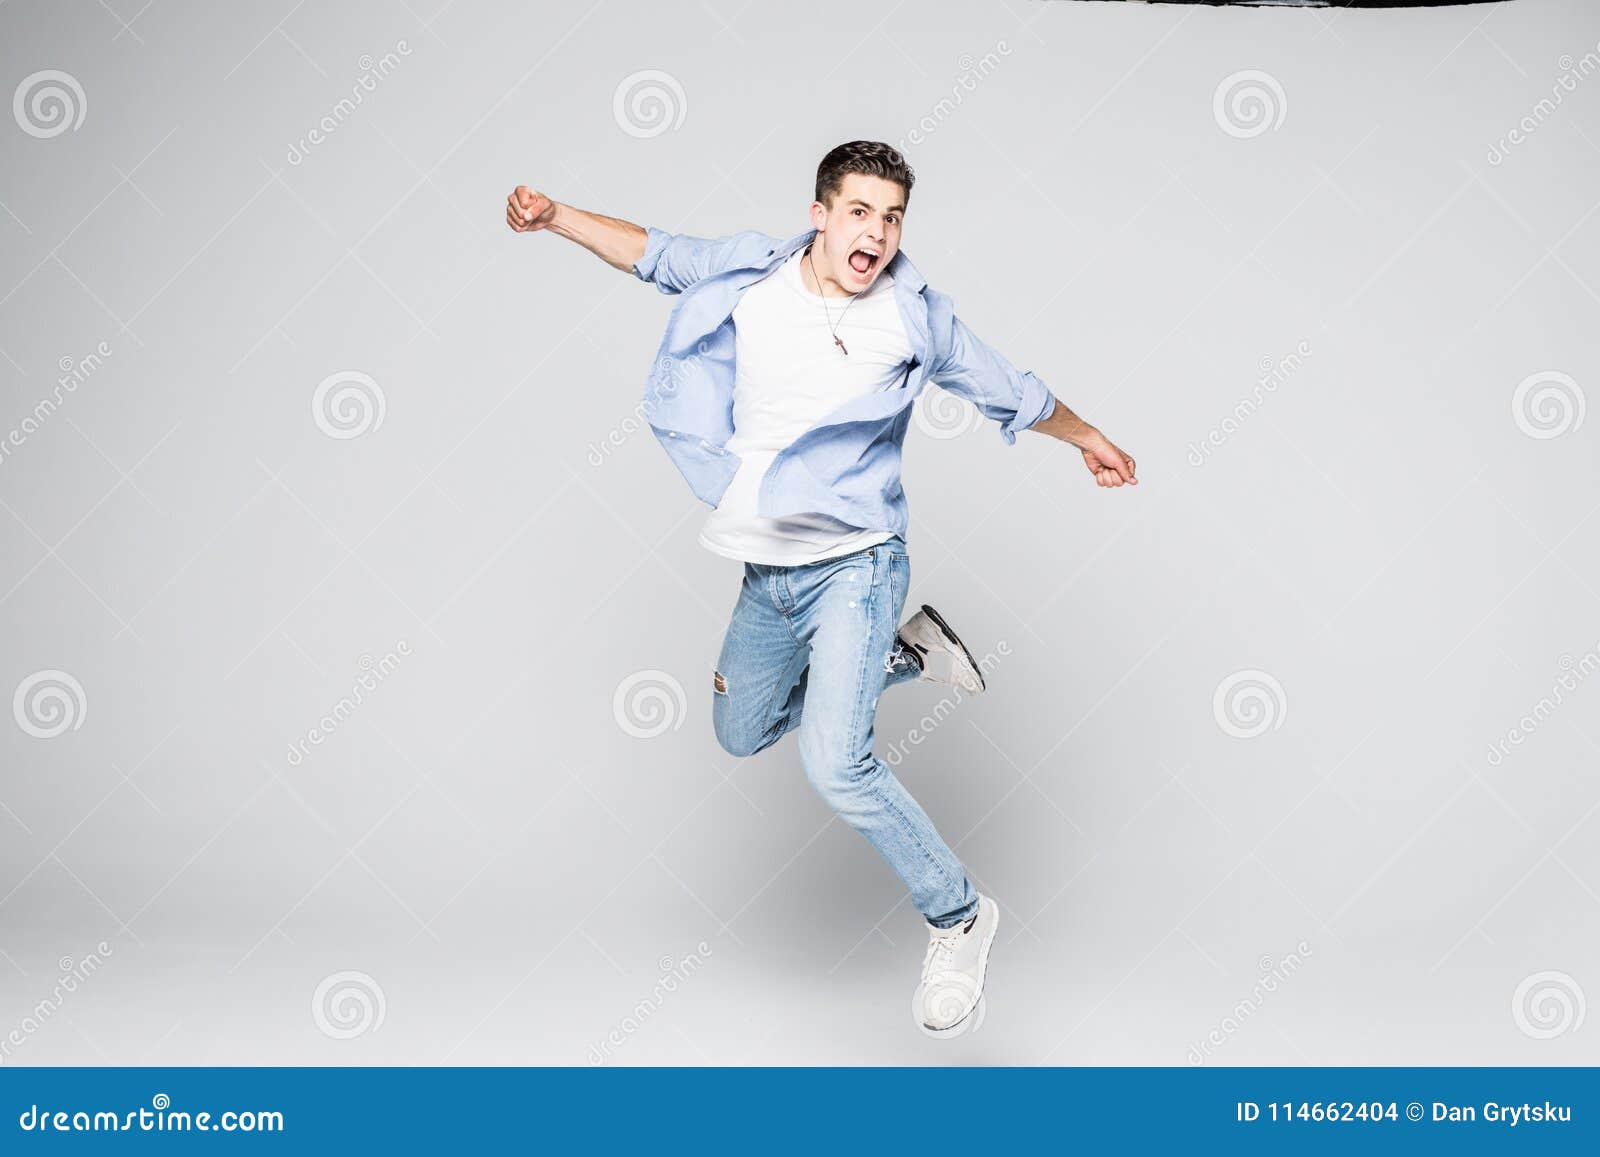 Happiness, Freedom, Movement and People Concept - Smiling Young Man ...